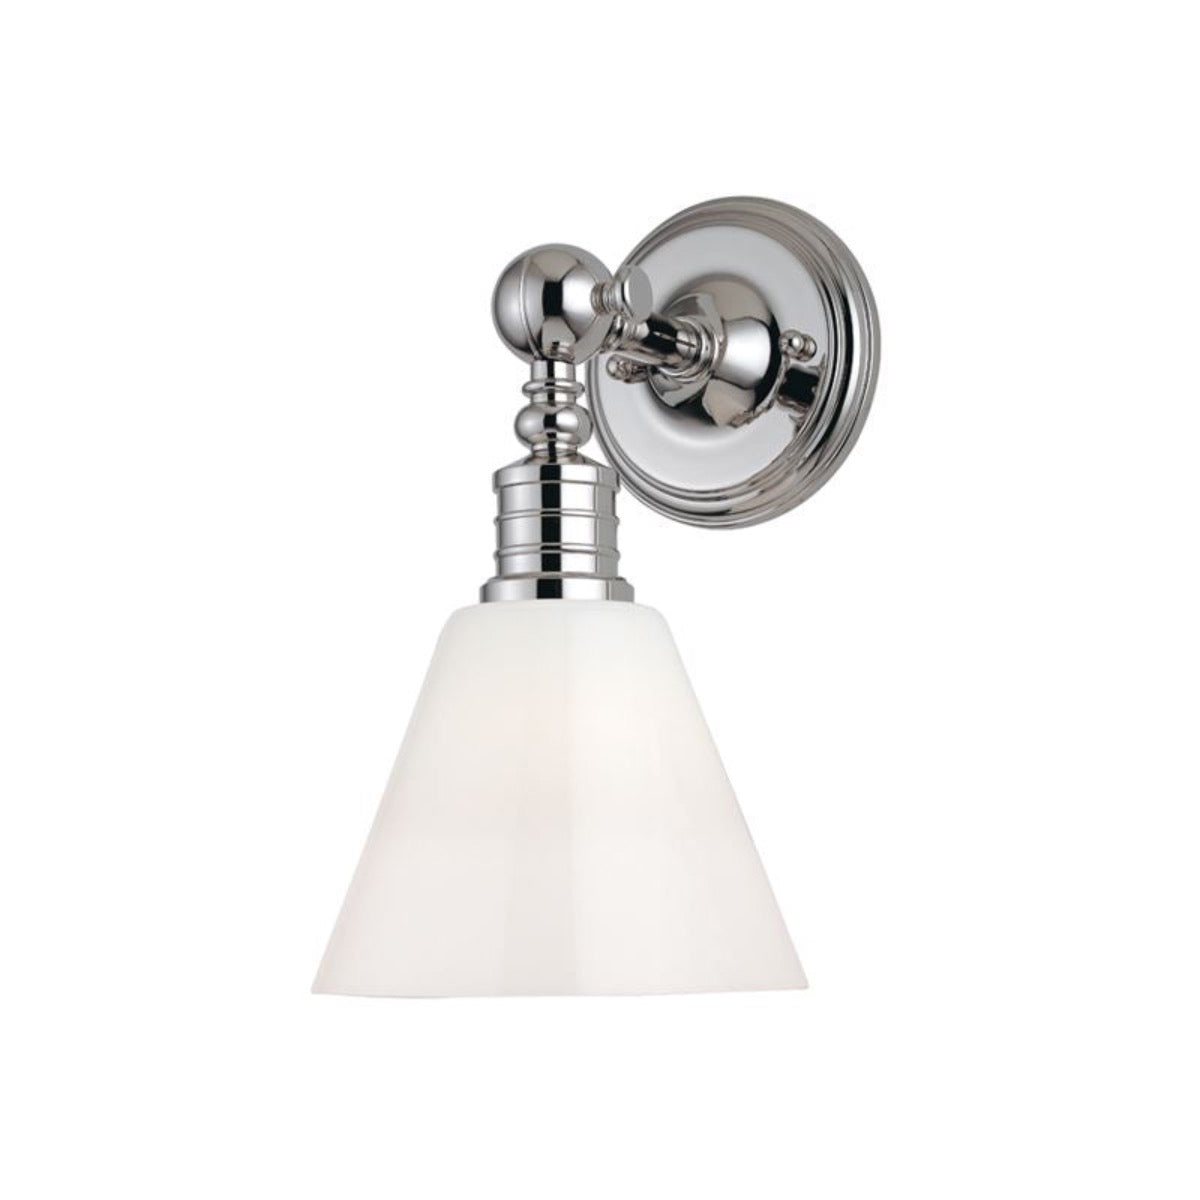 Glass Reade Sconce Polished Nickel. Front view. 